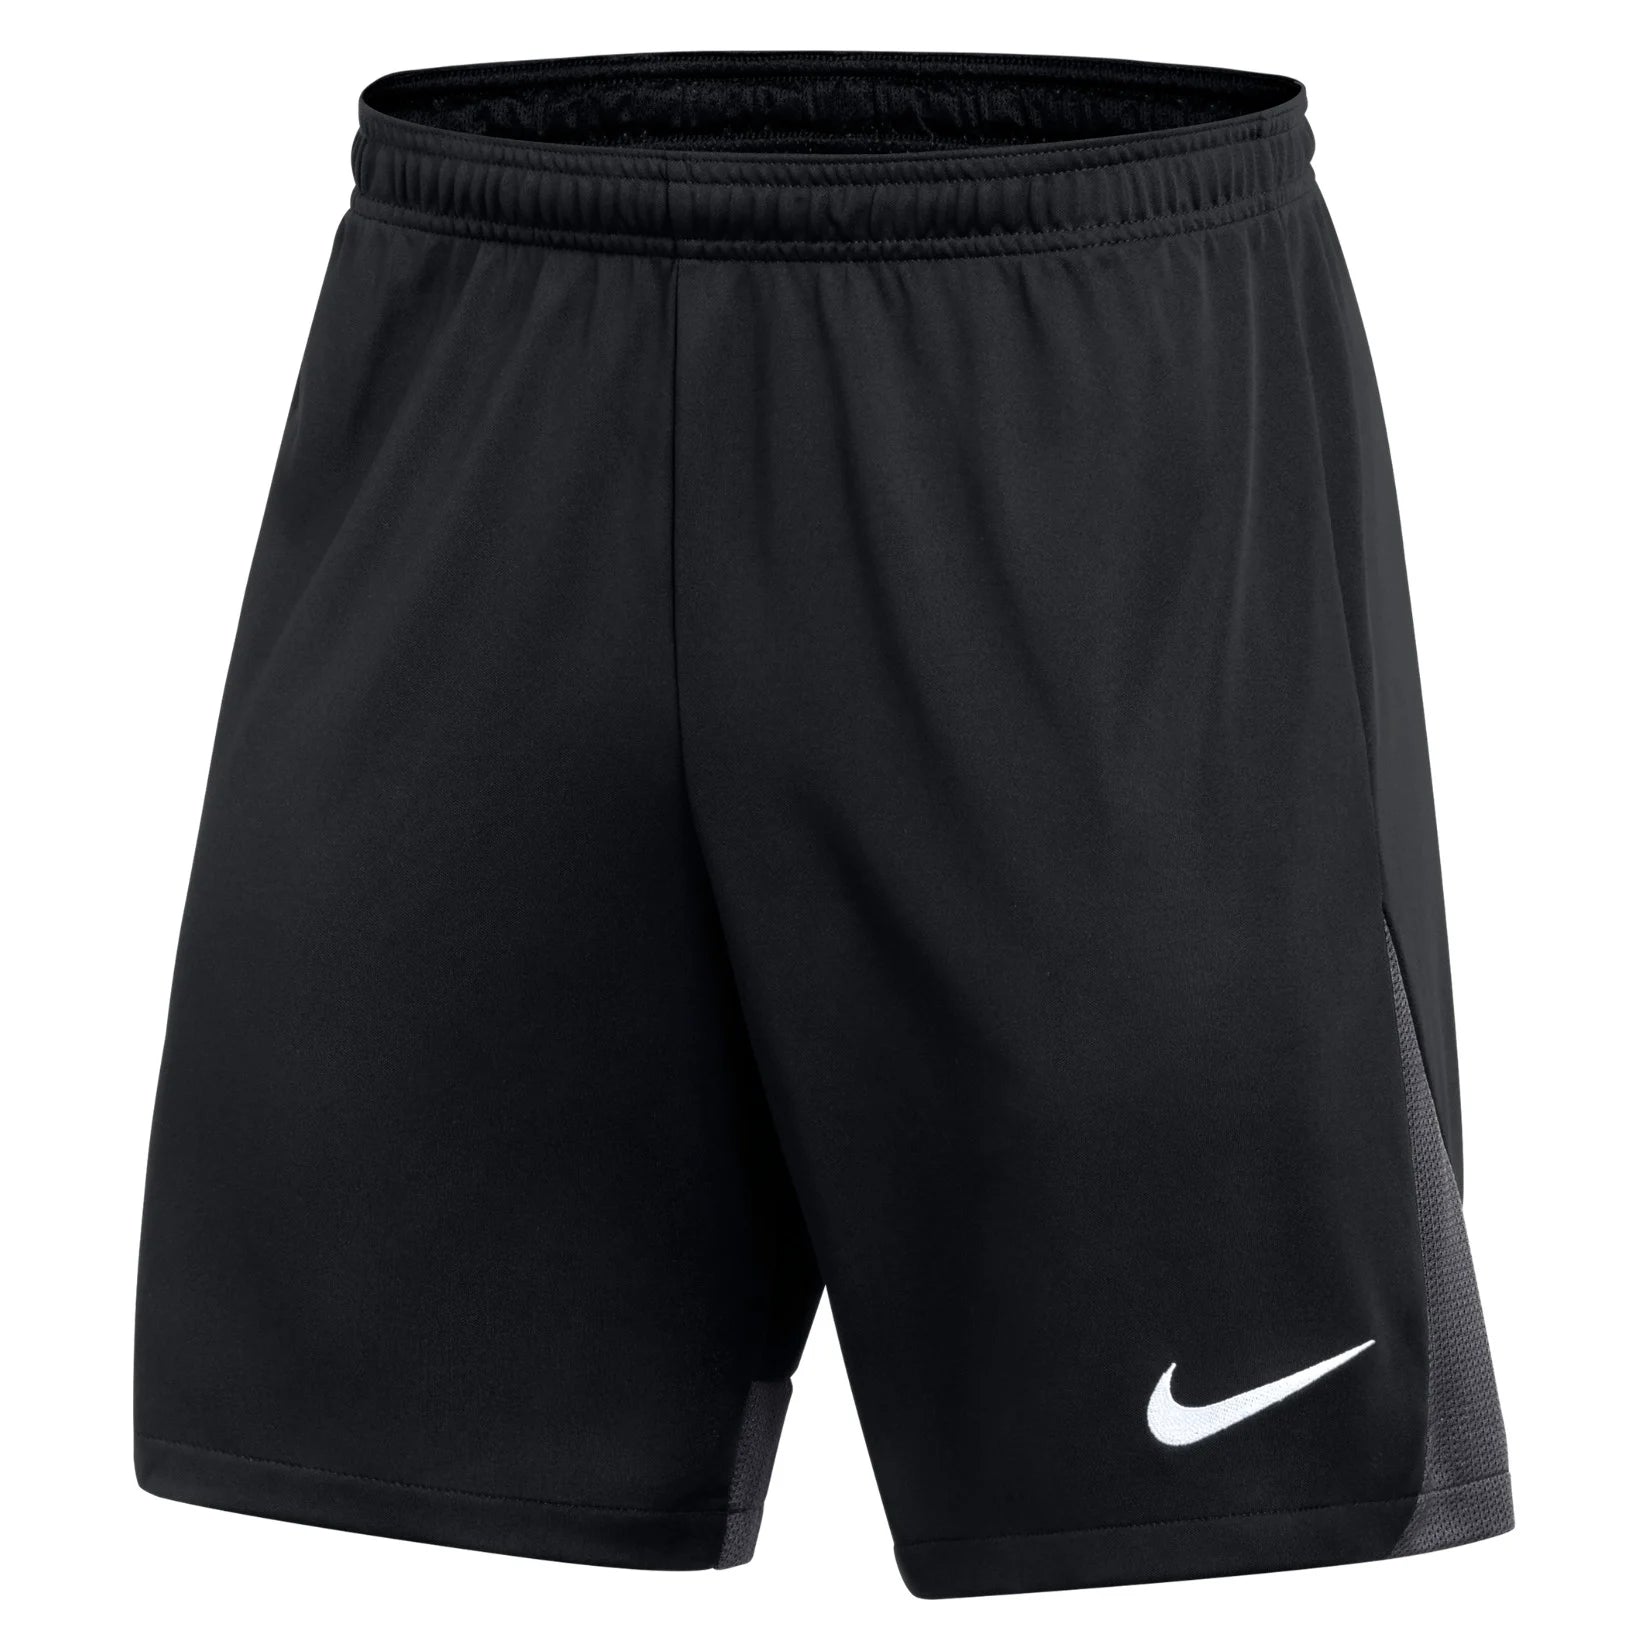 2023/24 Nike Referee Training Shorts - Small Only